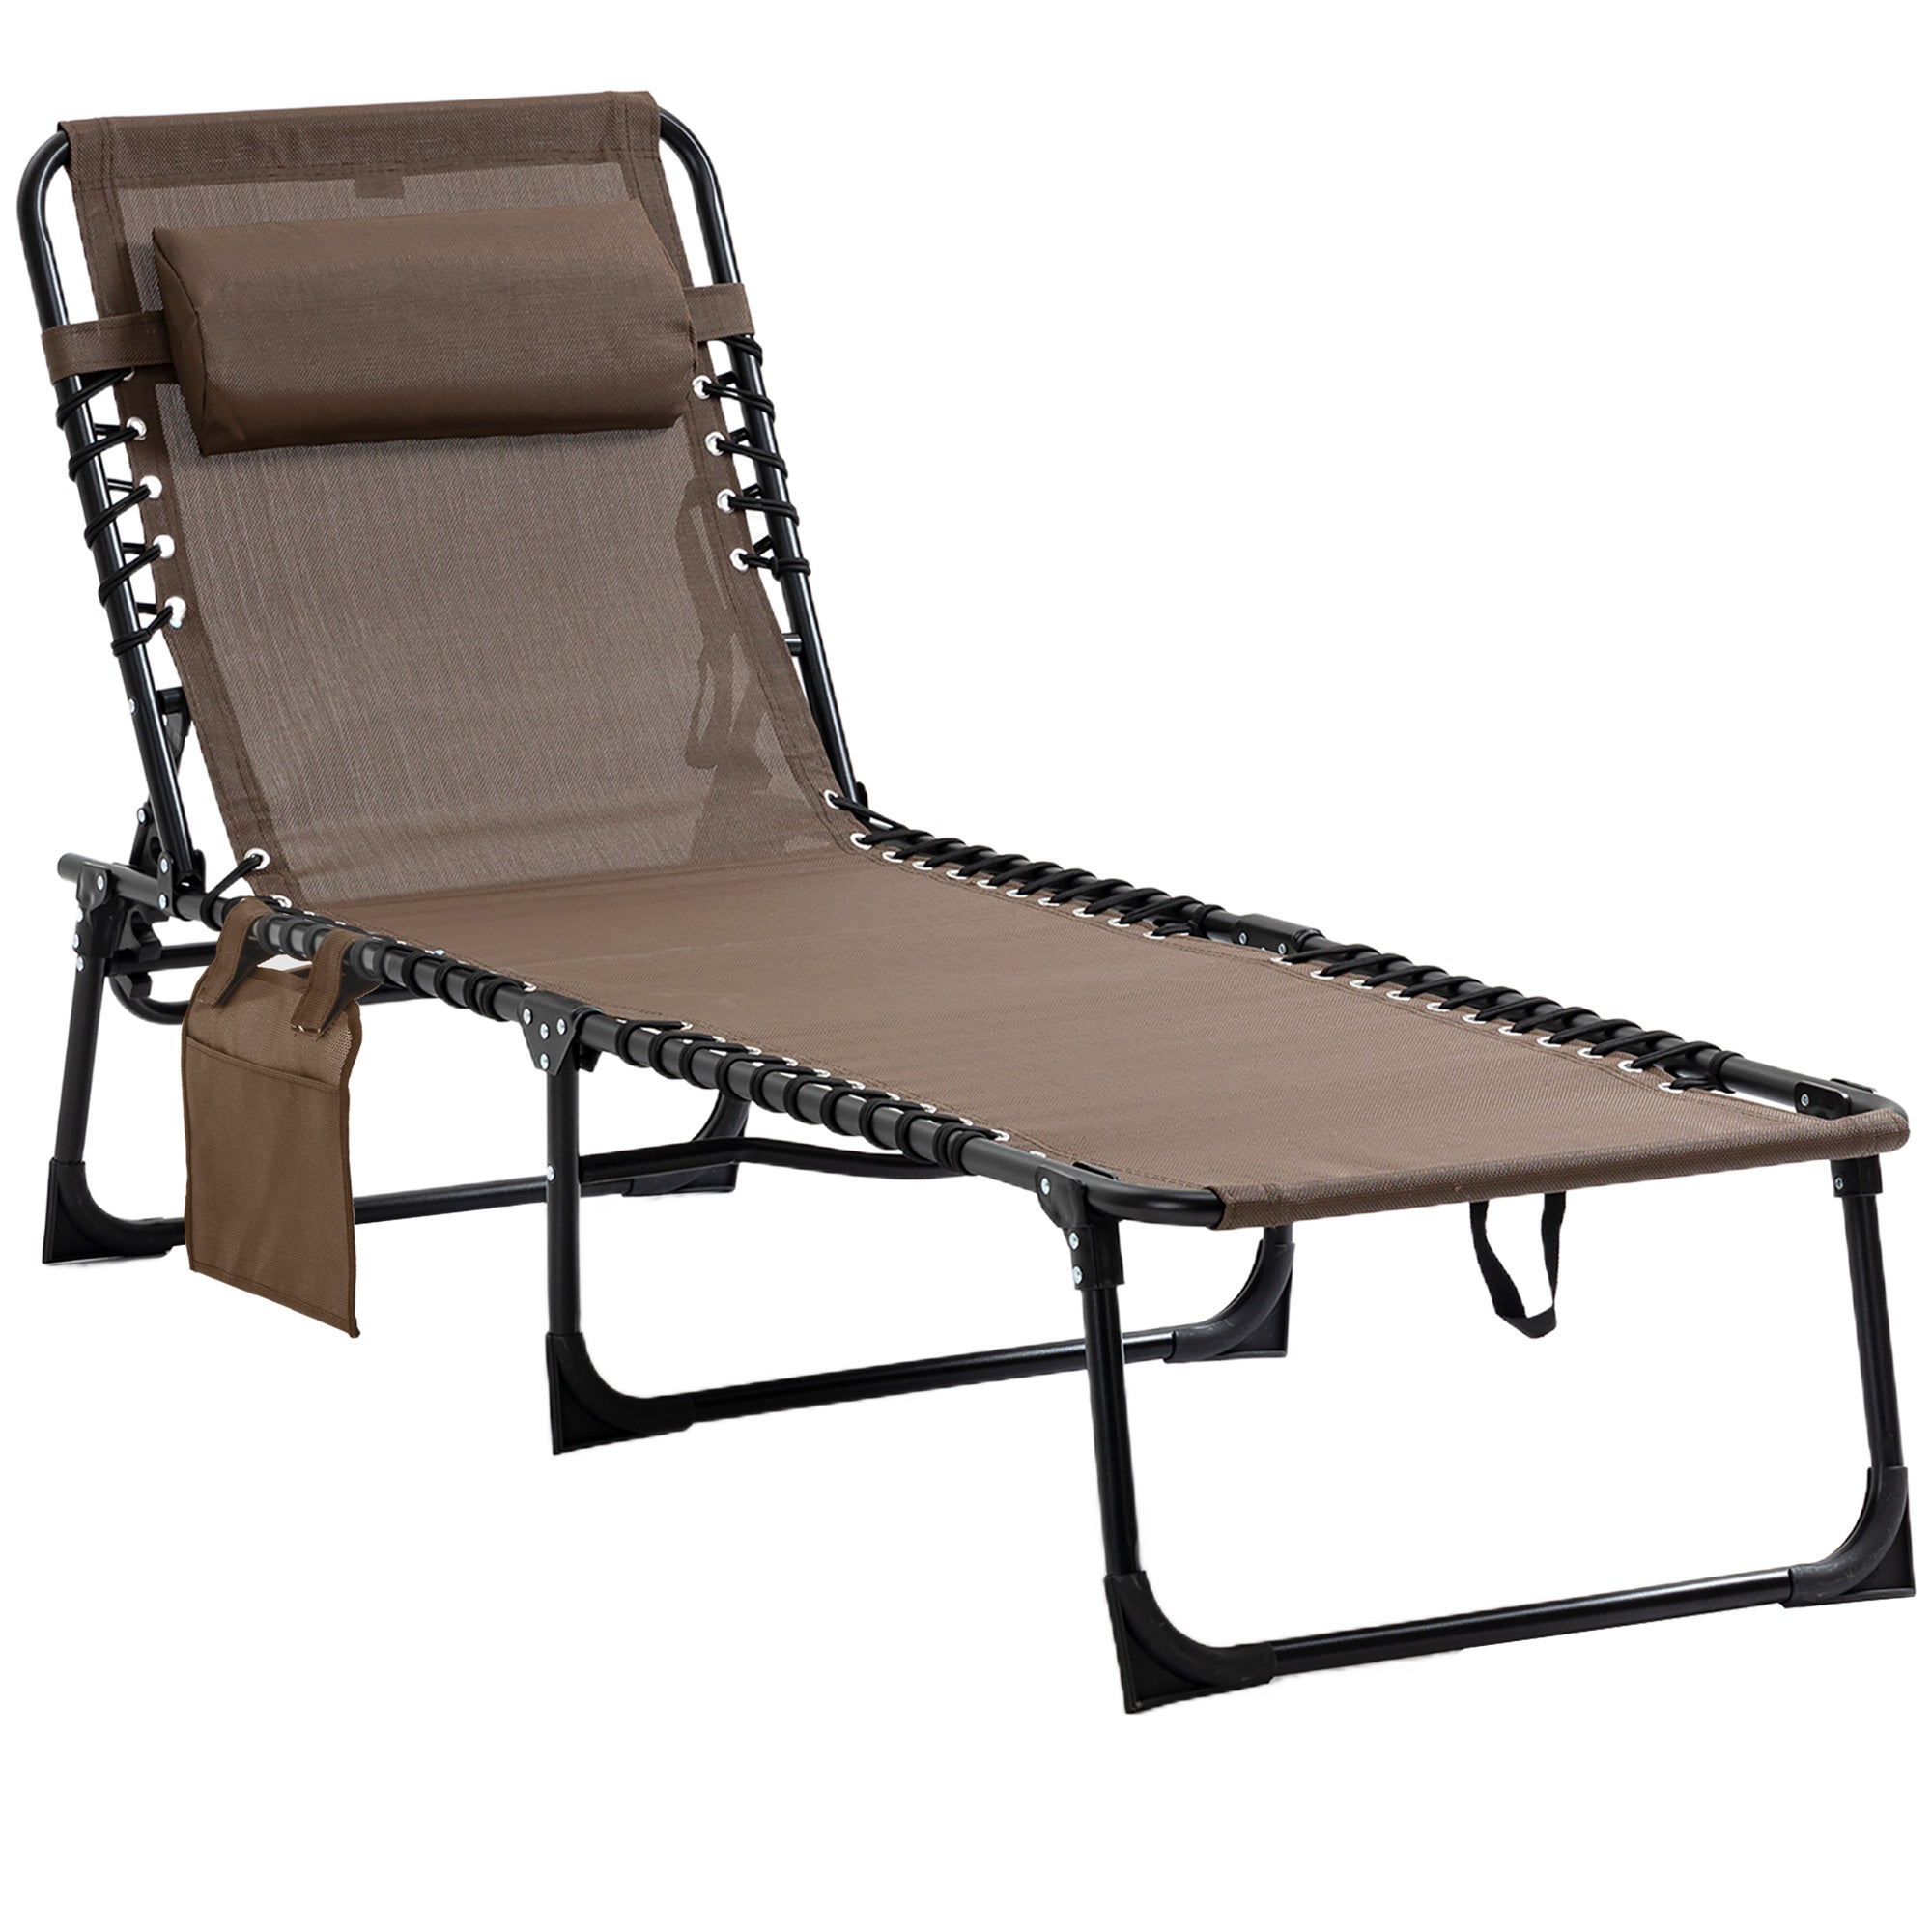 Reclining Lounge Chair, Portable Sun Lounger, Folding Camping Cot, with Adjustable Backrest and Removable Pillow, for Patio, Garden, Beach - Brown